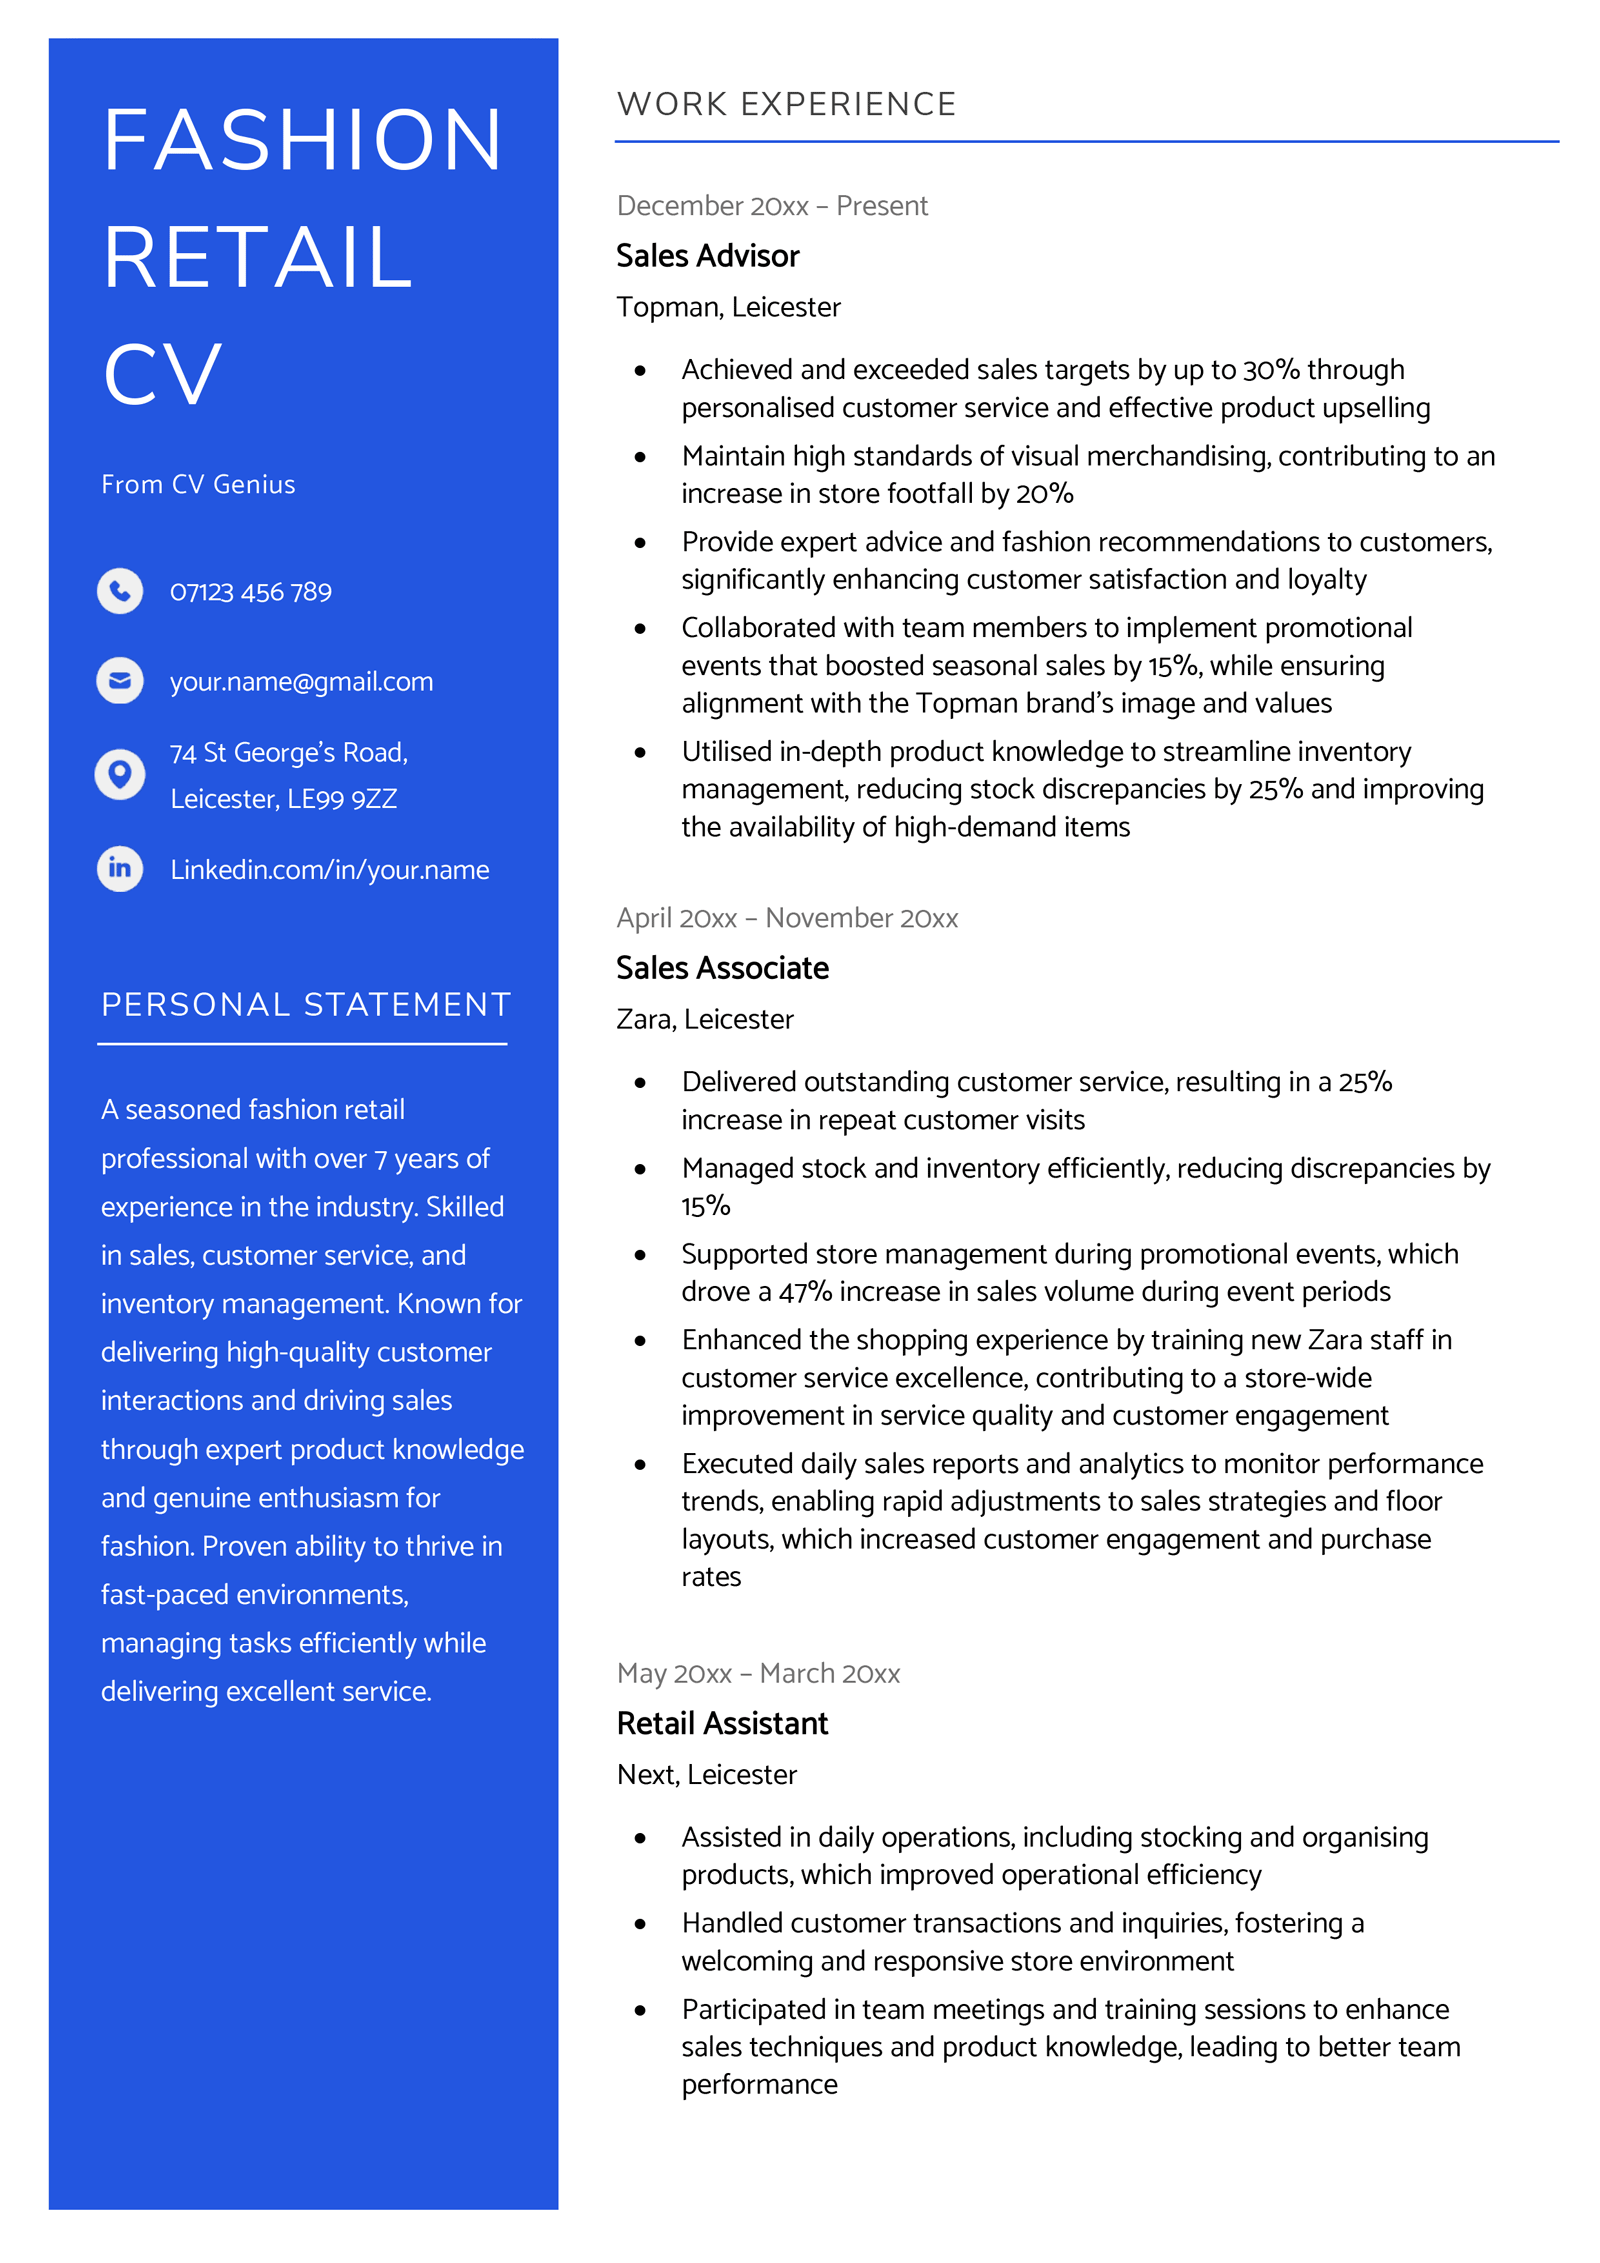 A two-column fashion retail CV in a blue column scheme with a personal statement to the left.